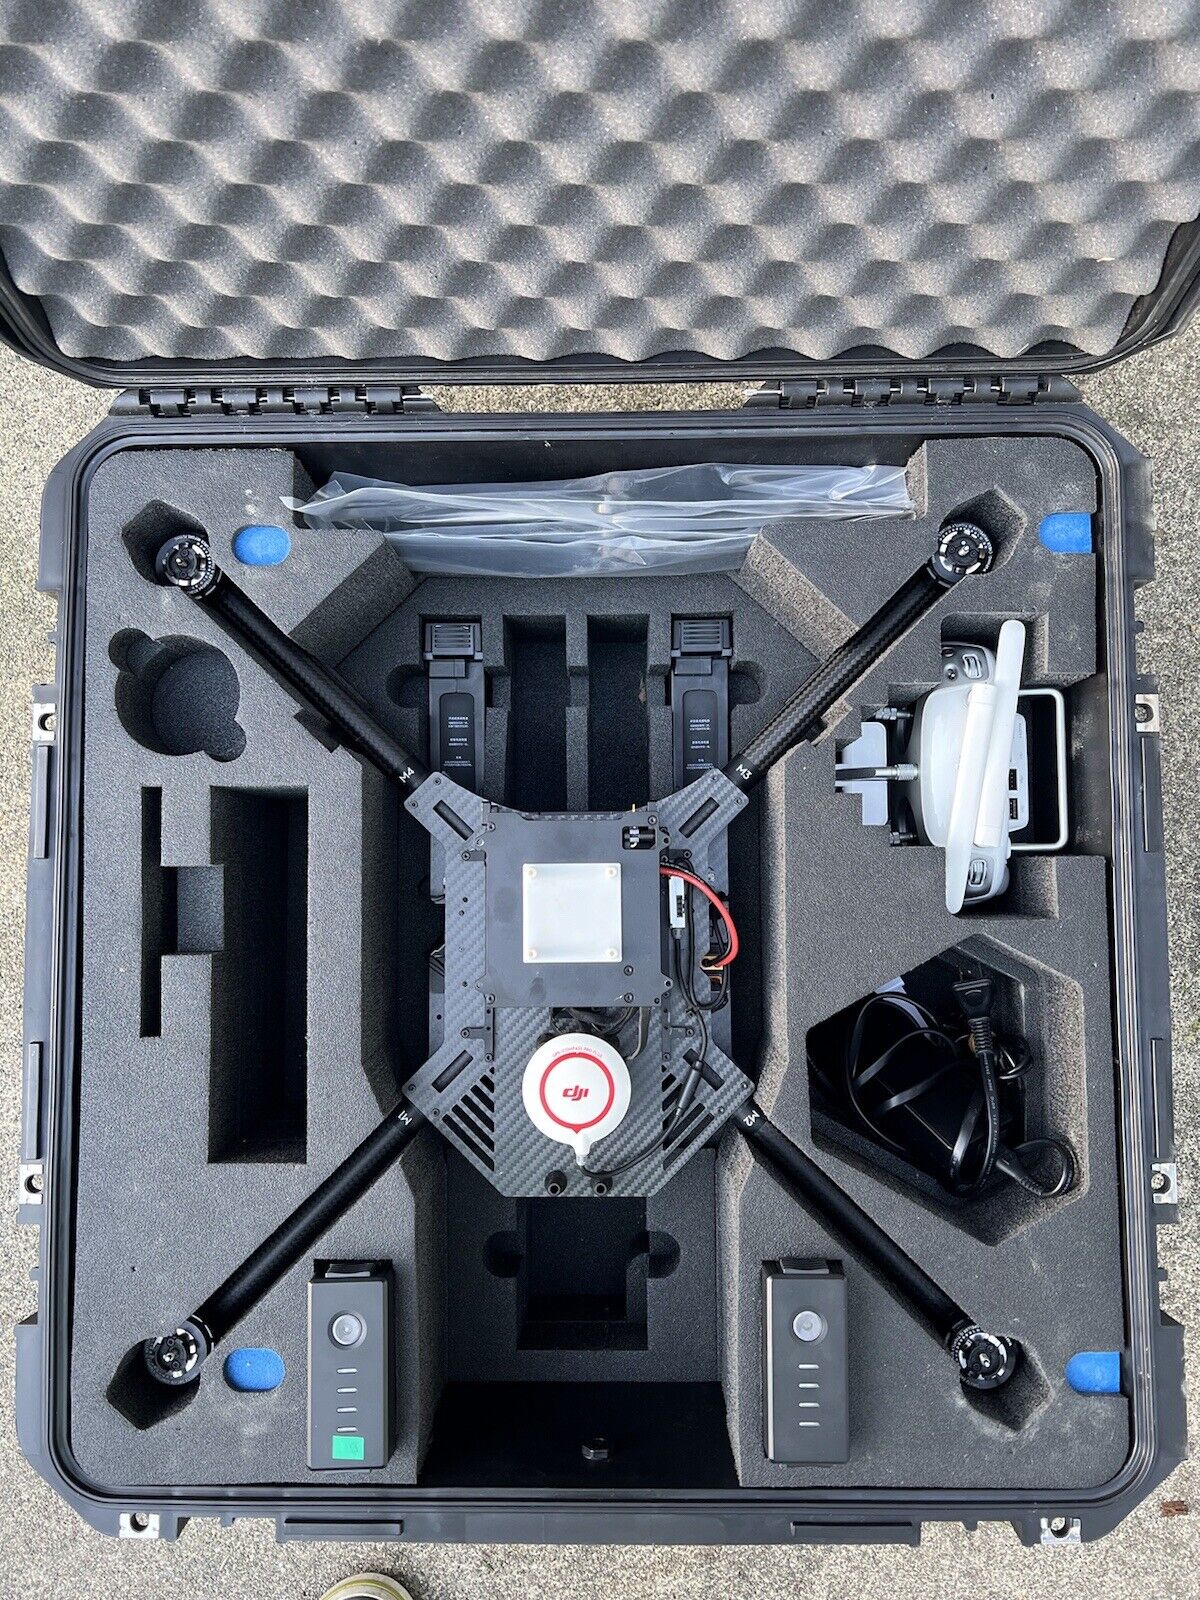 DJI Matrice 100 - Excellent Condition (M100) - Ready To Fly (with/ 4x batteries)